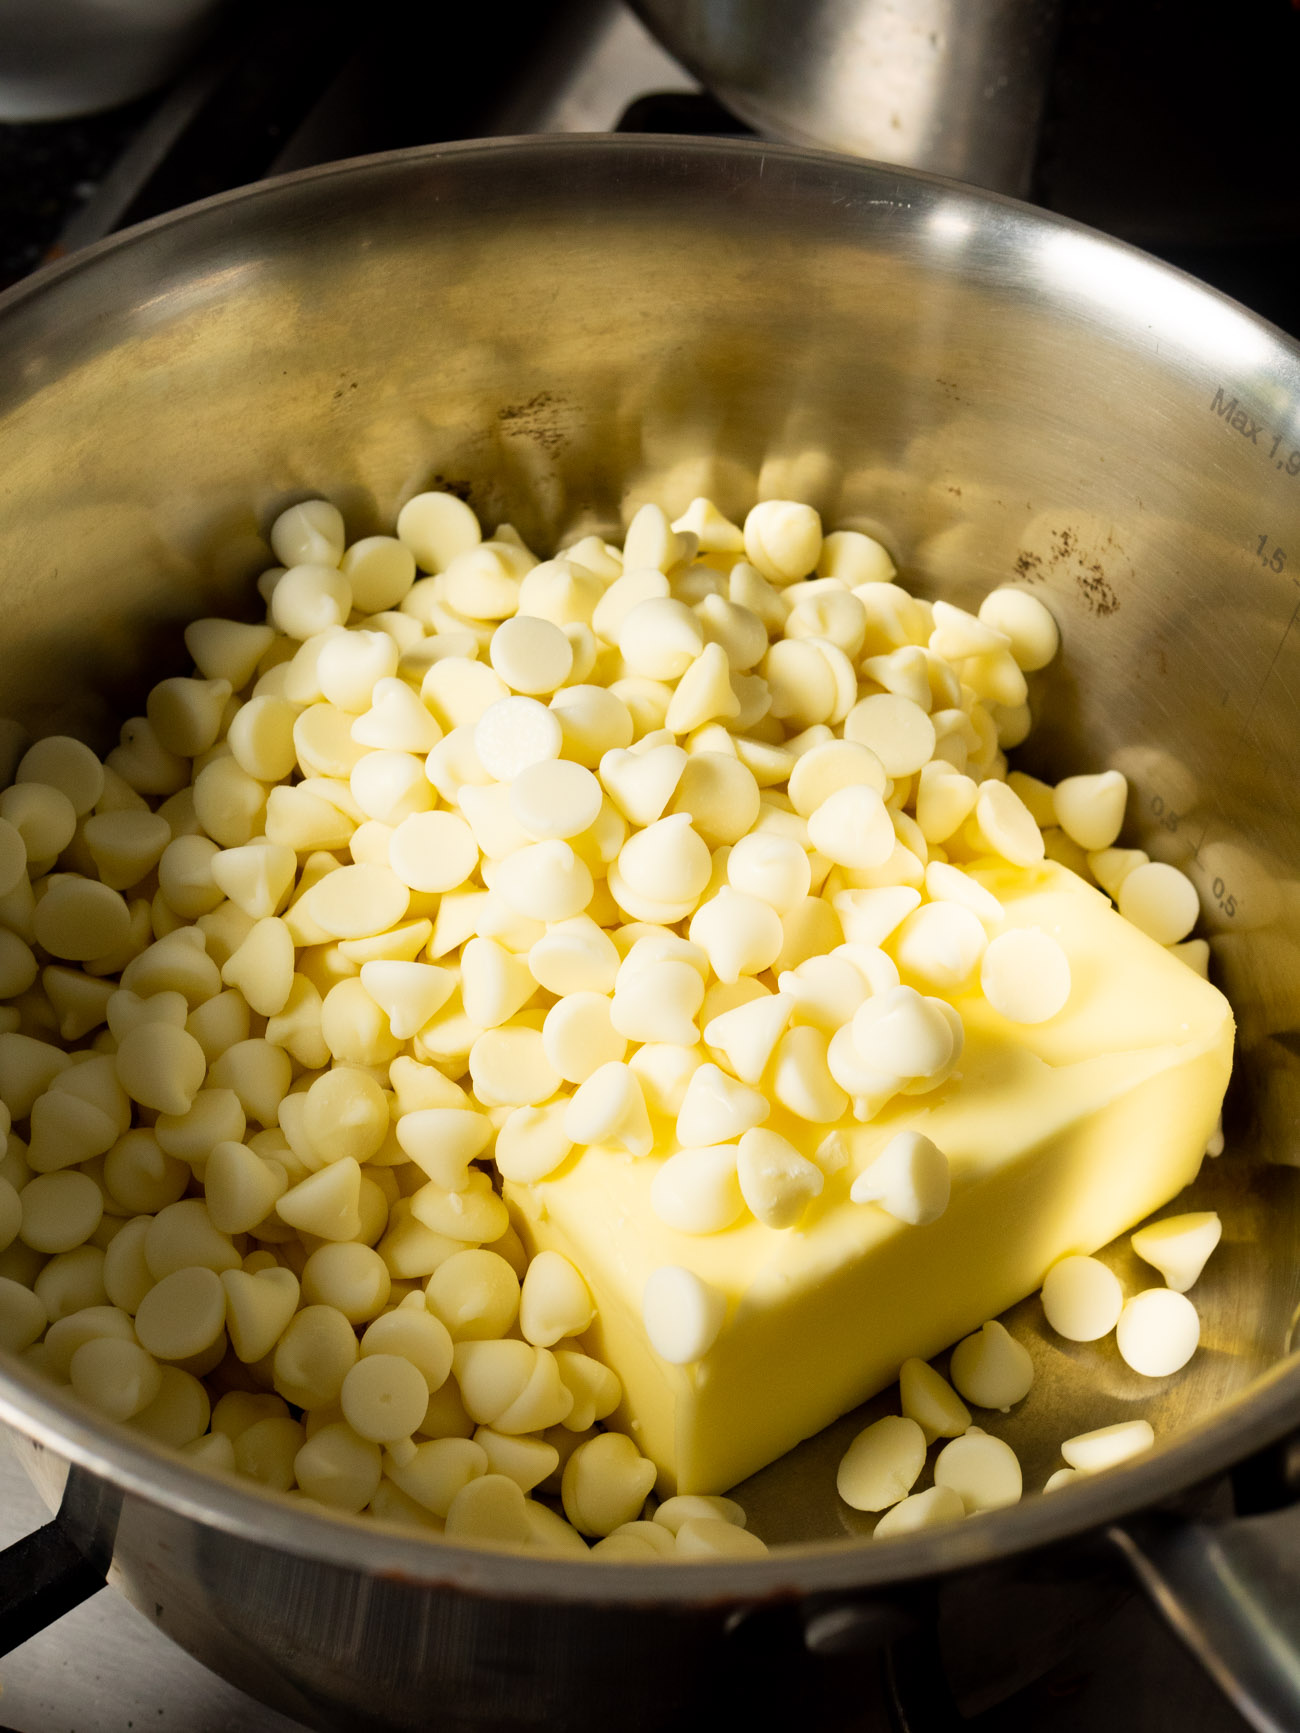 Melt the butter and white chocolate chips in a large pot over low heat, stirring frequently, until just melted. Remove from the heat and cool.